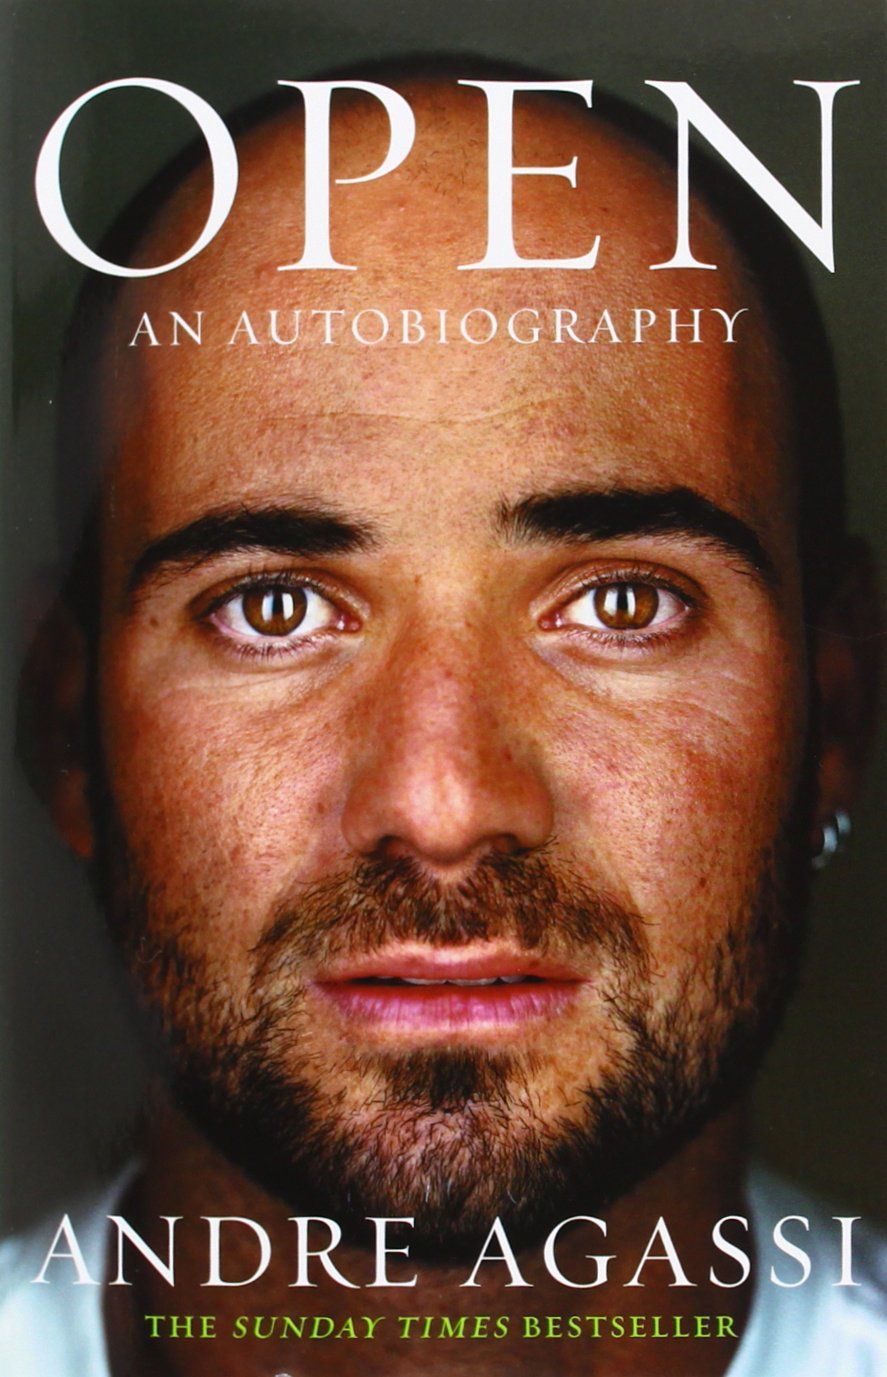 Book Review  Open: An Autobiography, by Andre Agassi